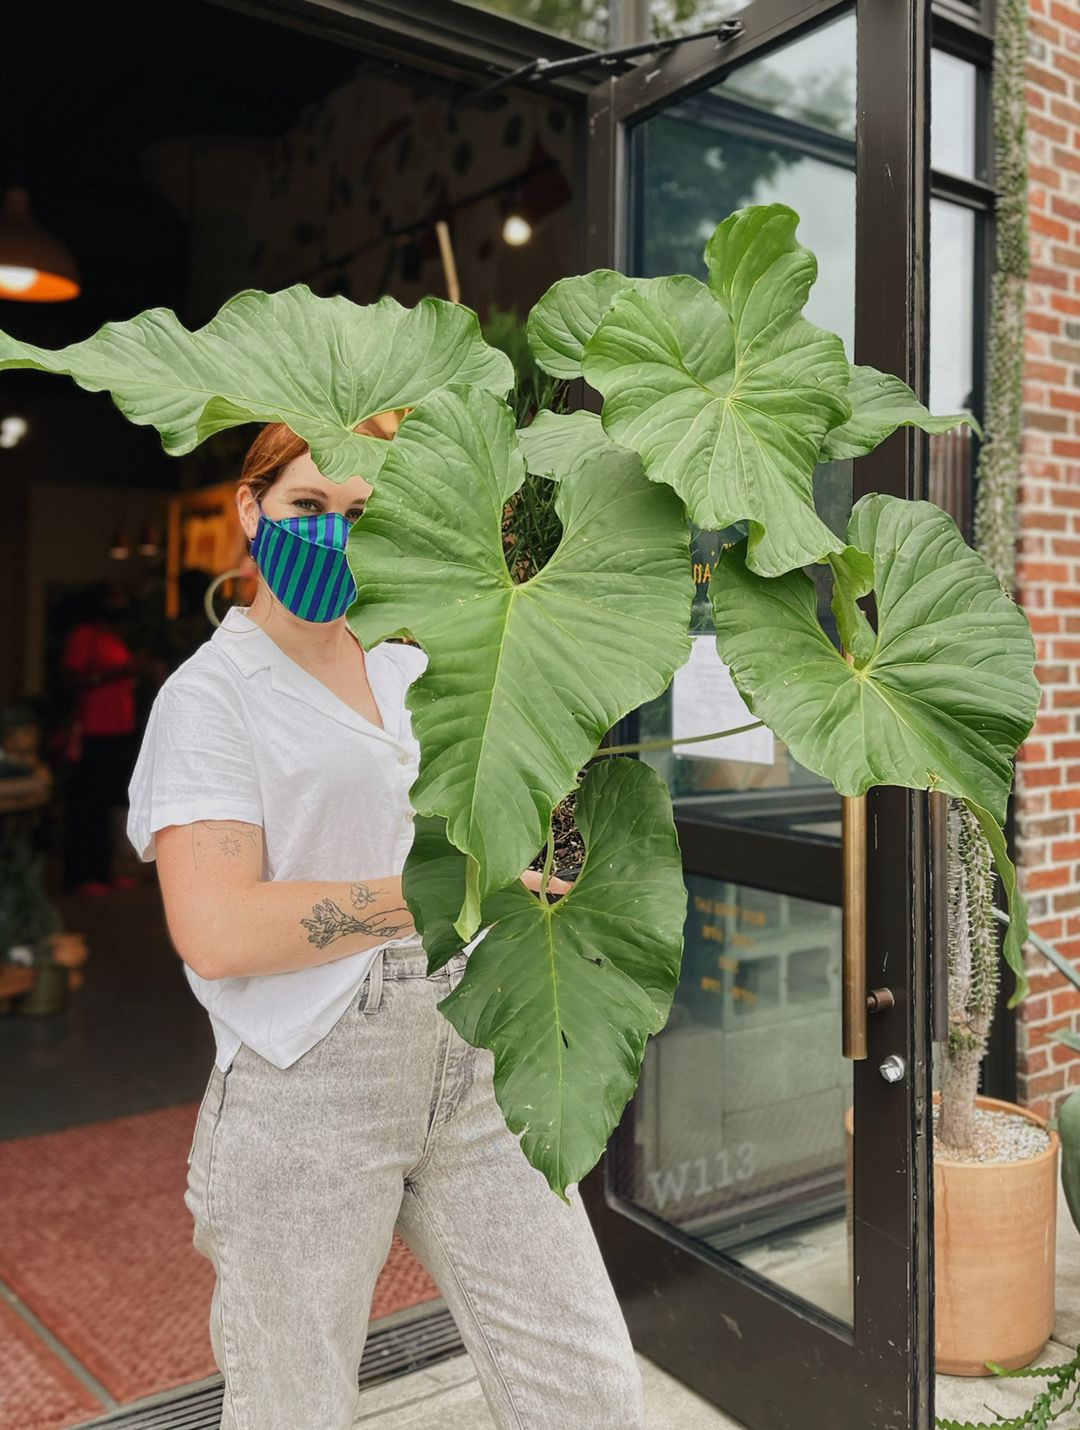 Libby Hockenberry carries a giant house plant outside of her plant and flower shop in Atlanta